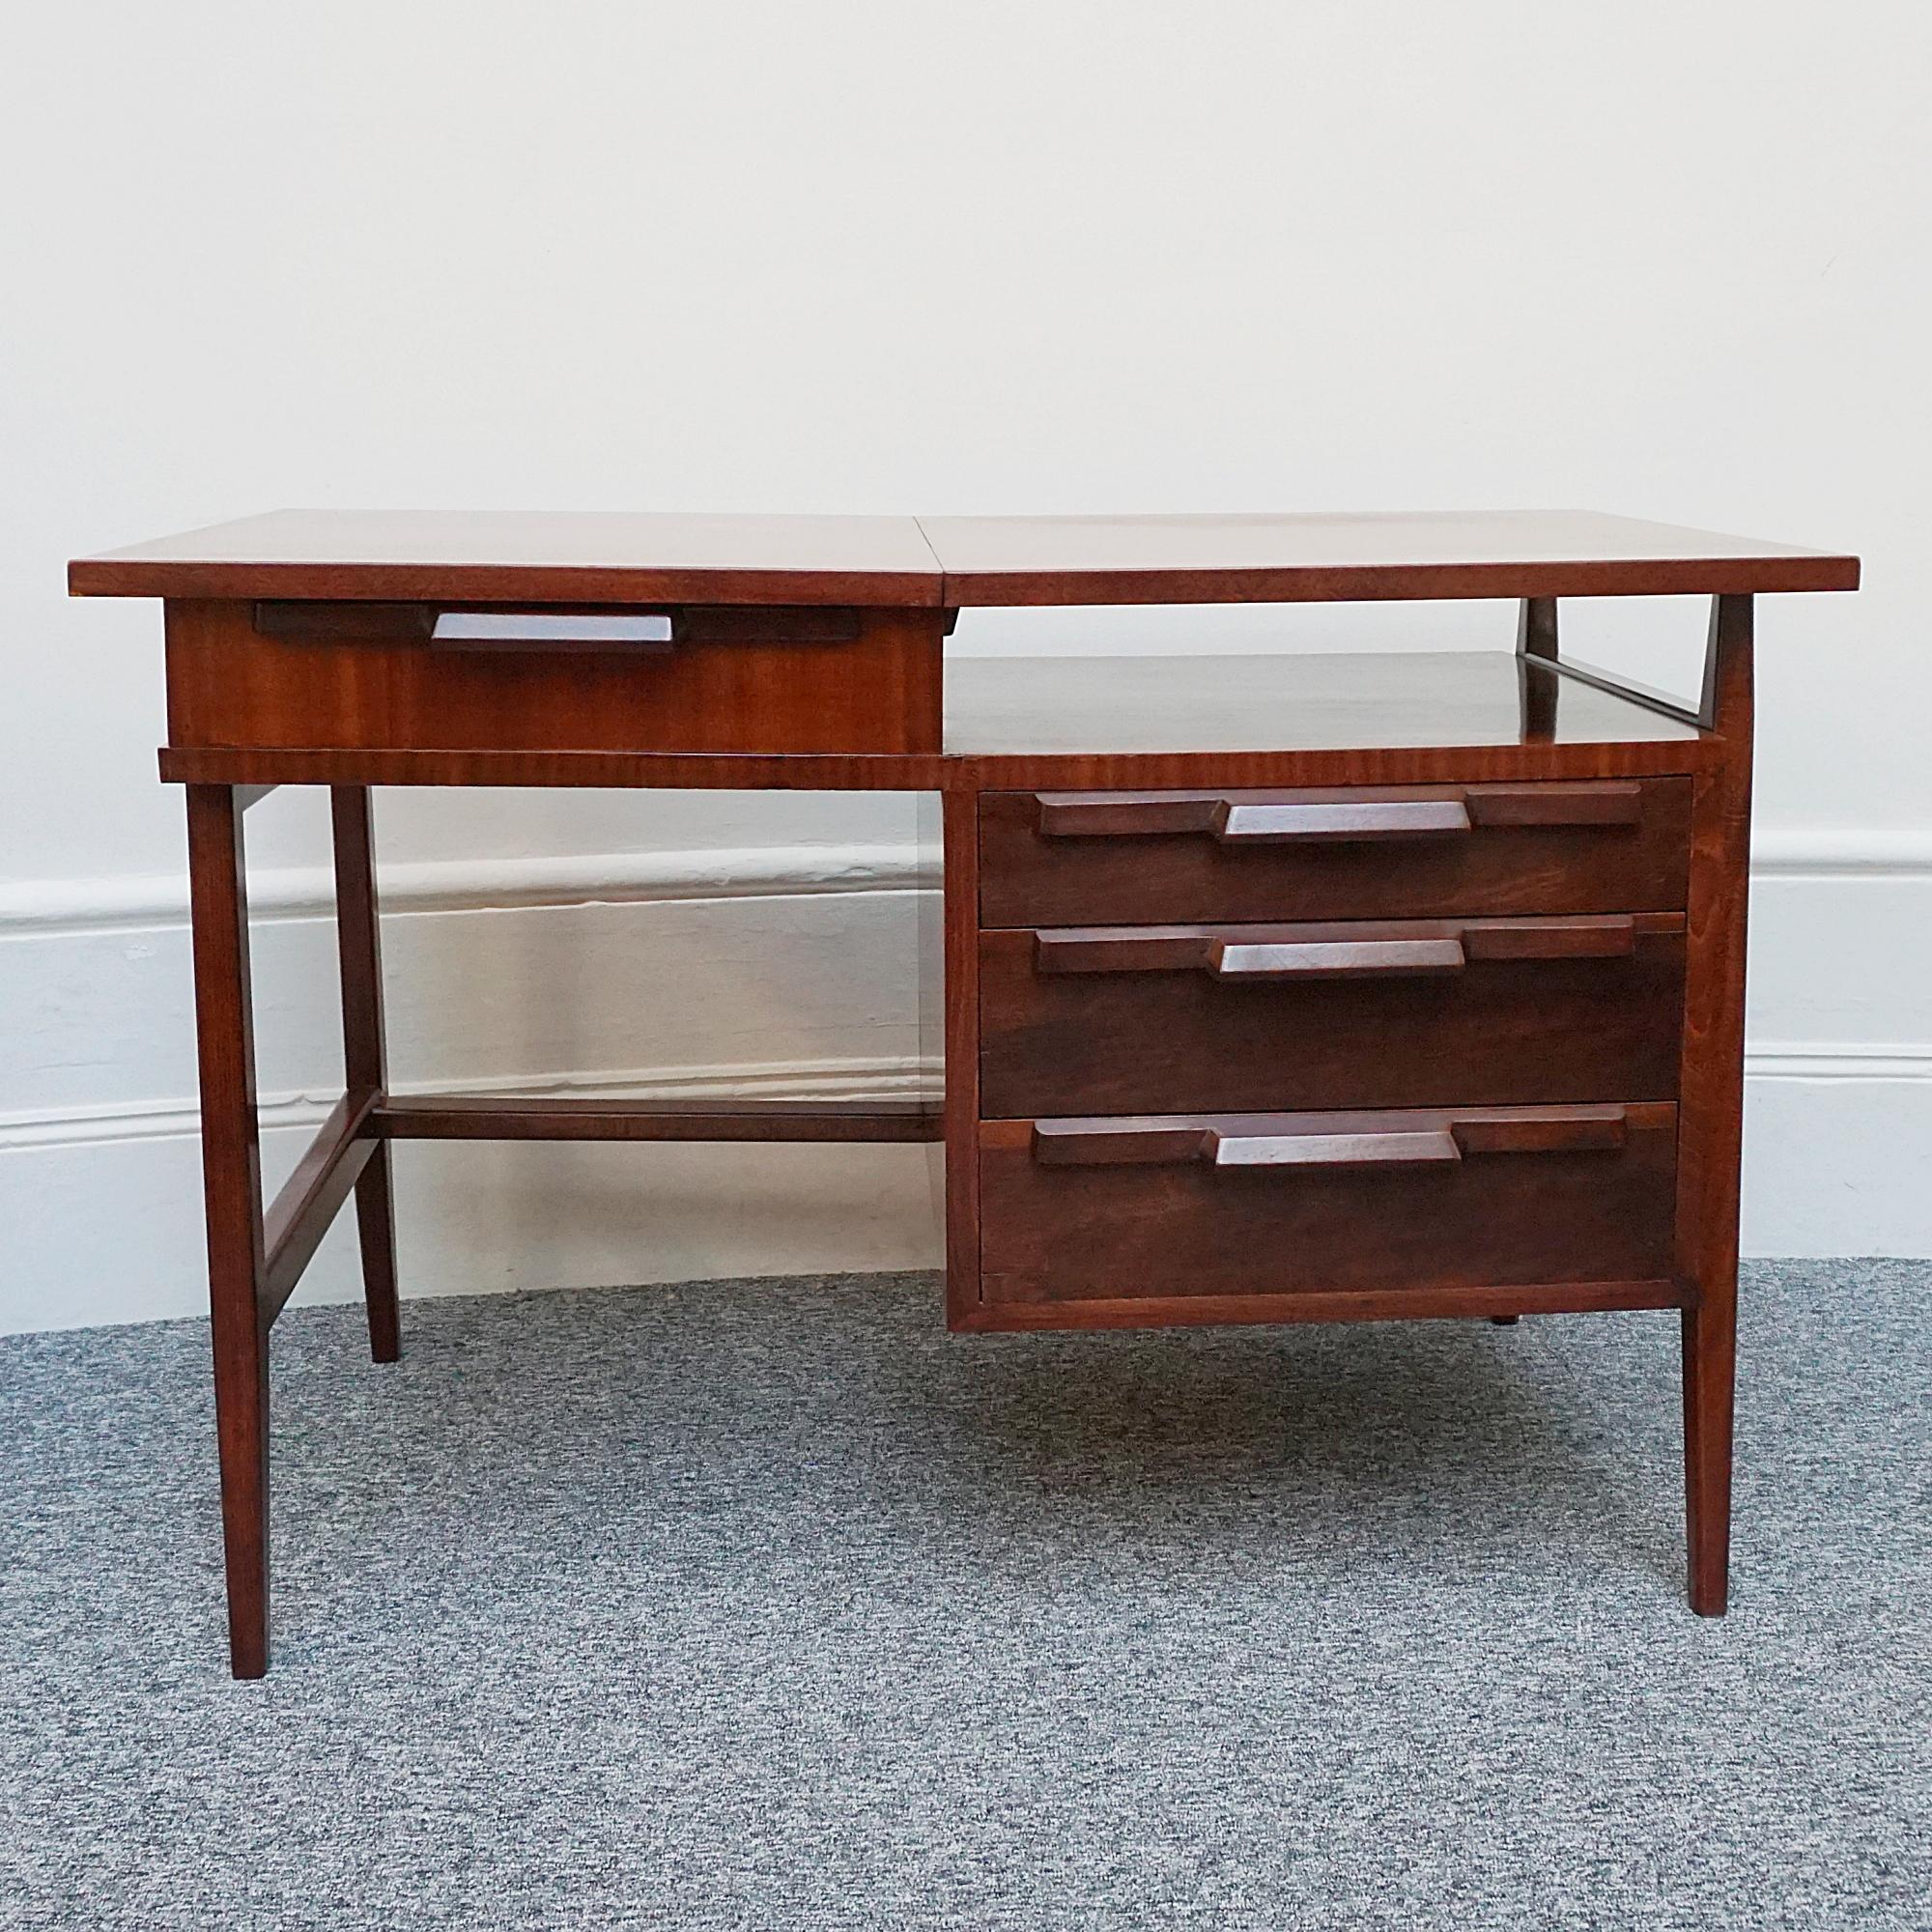 A Mid-Century writing desk. Mahogany and beech wood with three draws and lift up hinged top. Attributed to Gio Ponti.

Dimension: H 78cm W 120cm D 69cm

Origin: Italian

Date: 1950

Item Number: 0202245

Gio Ponti (1891-1979) was an influential